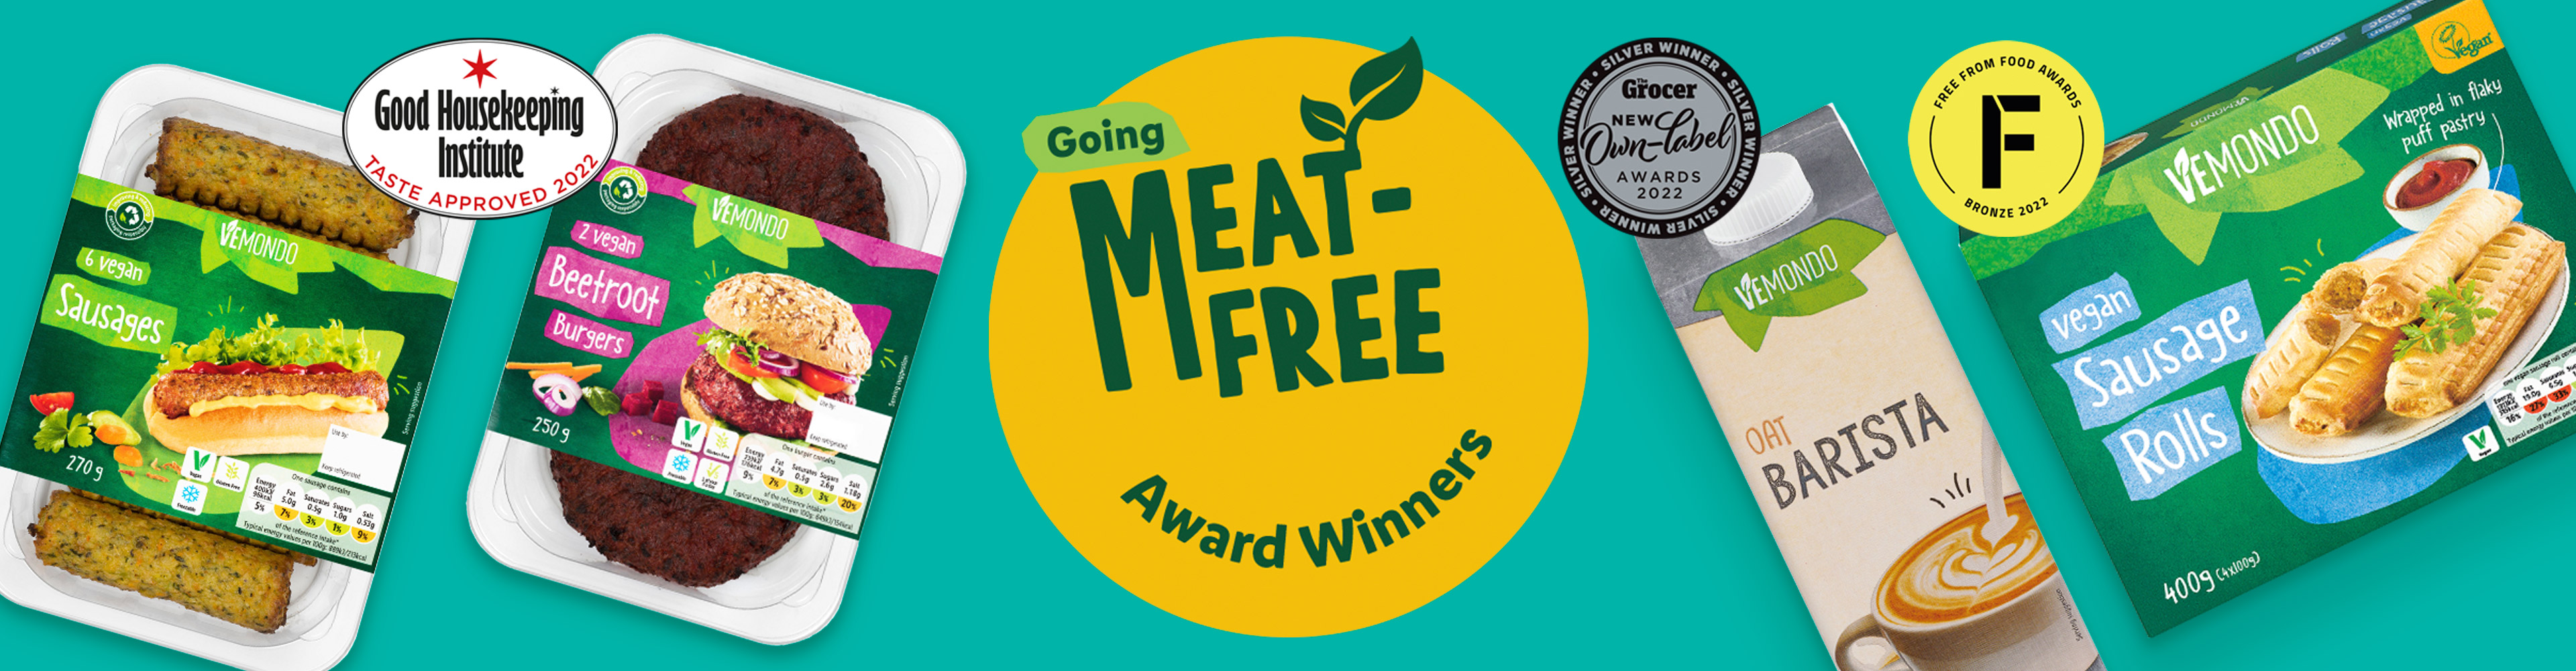 Our Meat-Free Products are Award Winning!